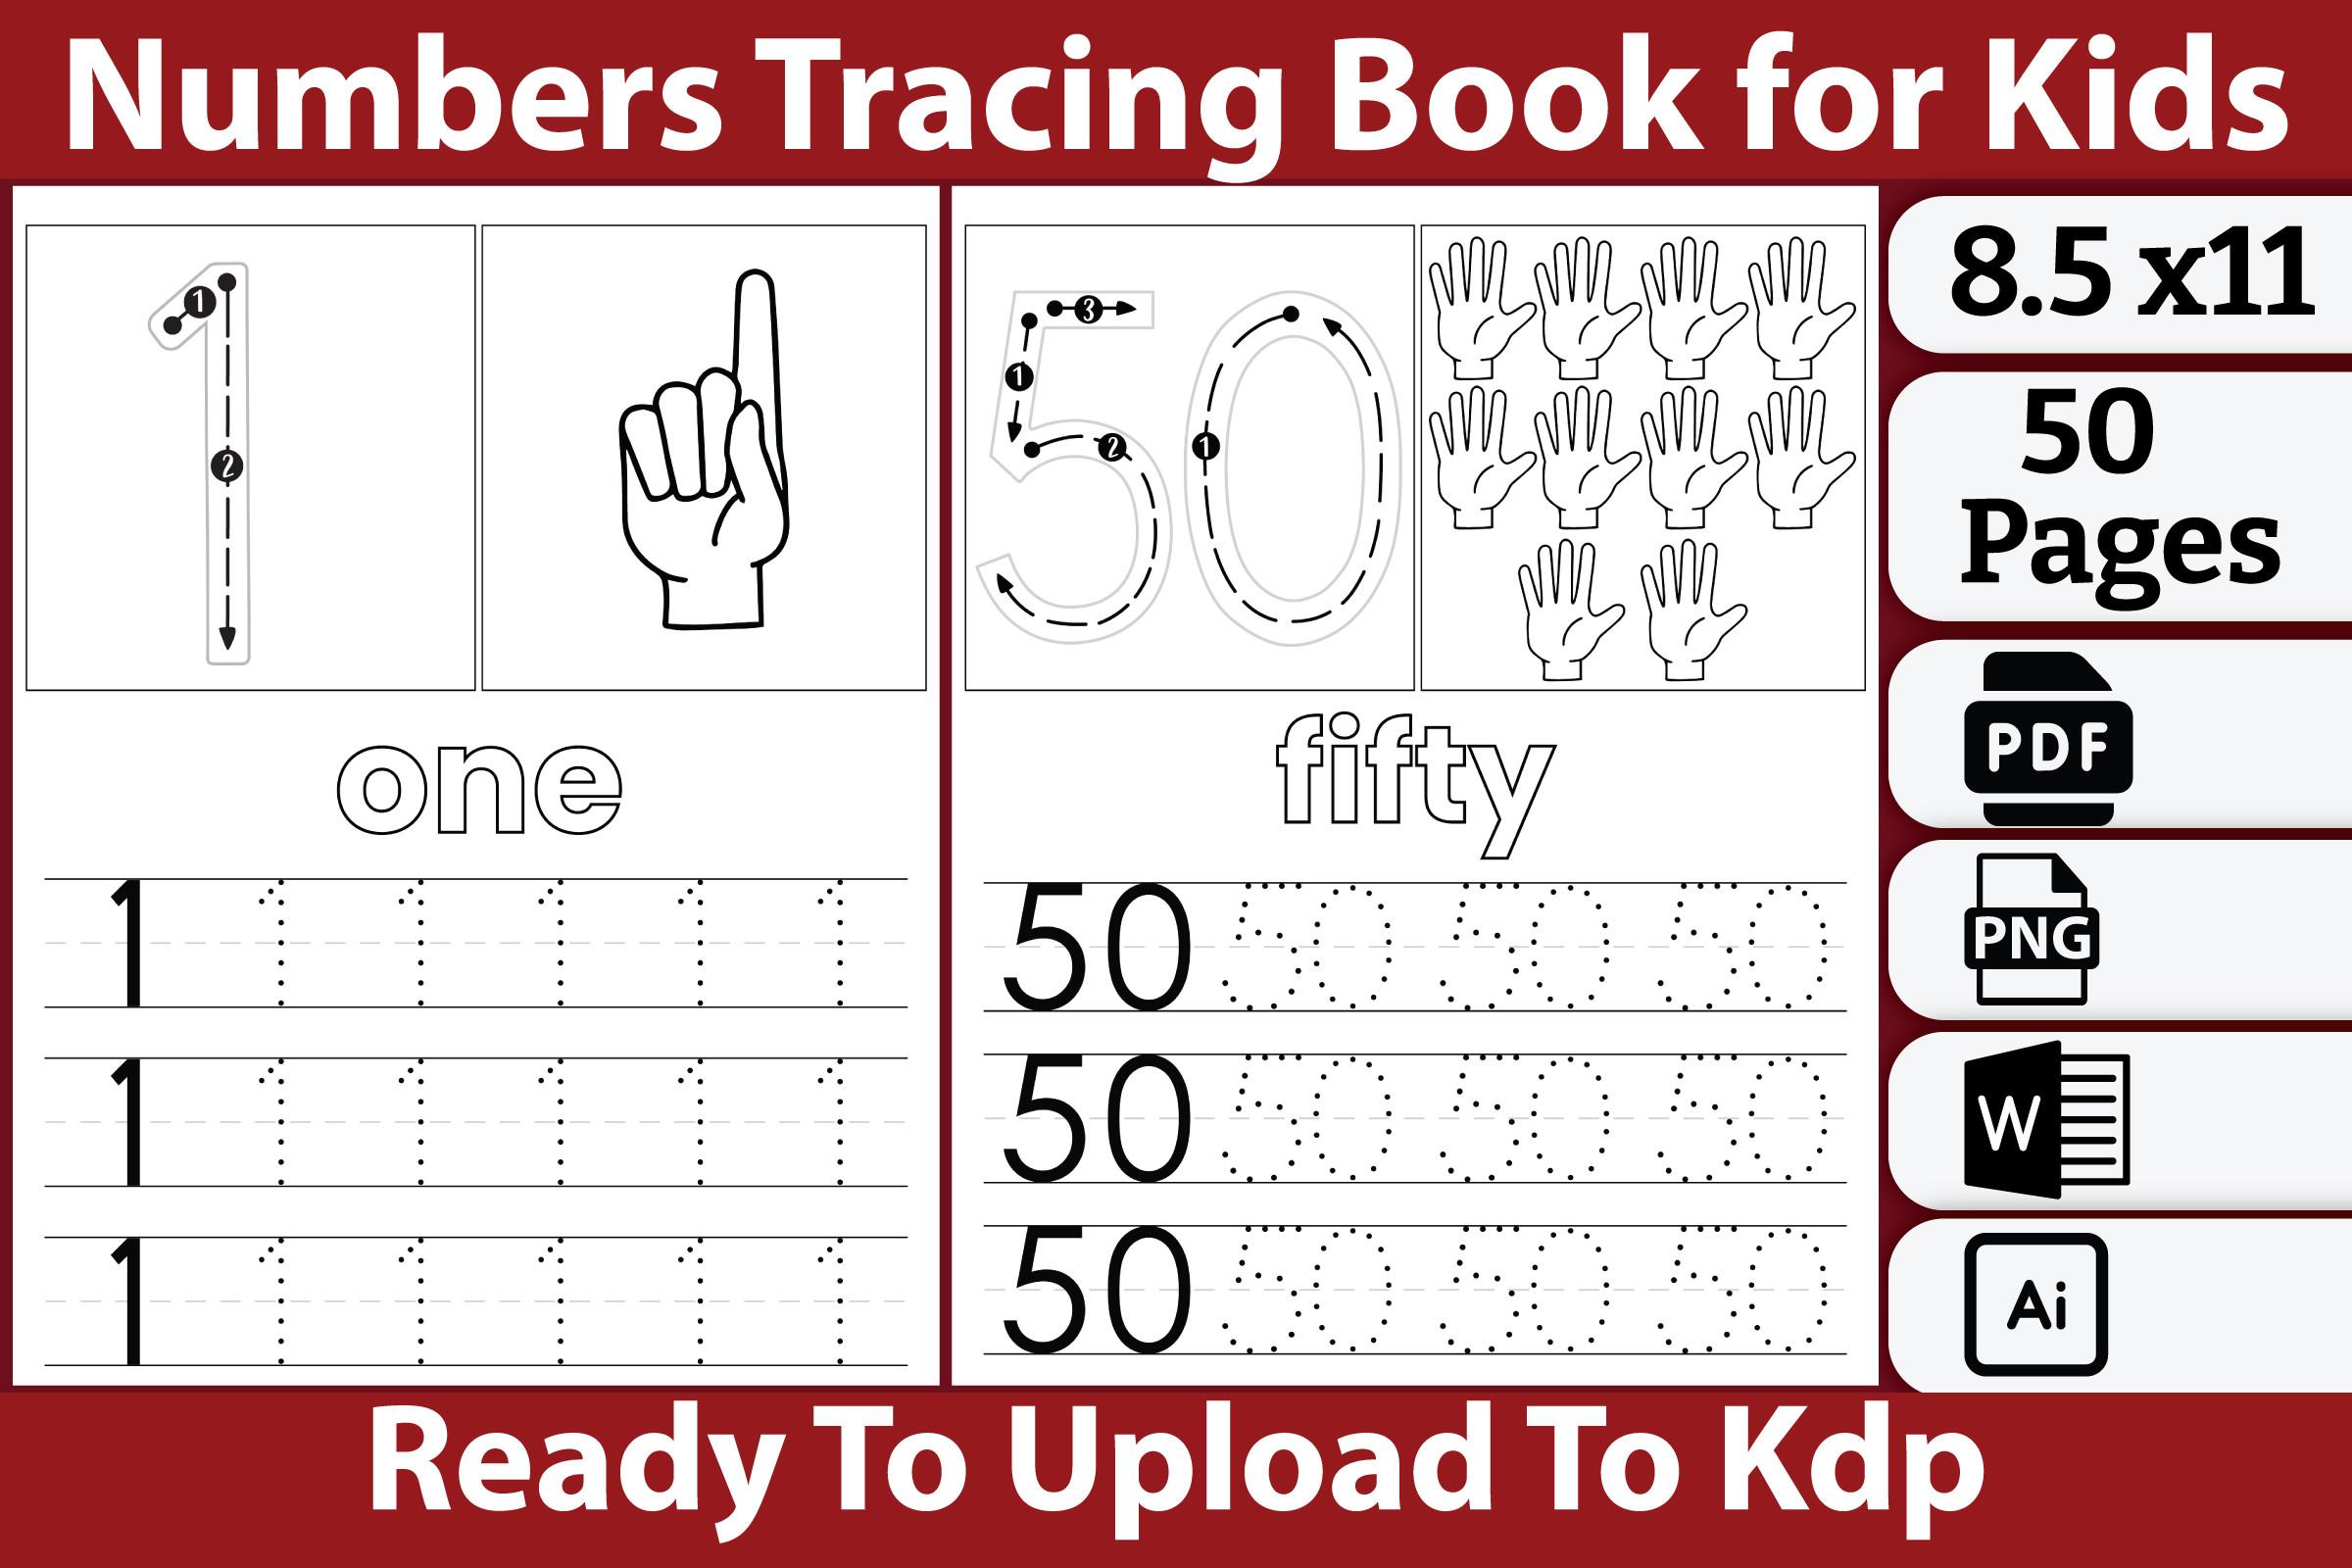 Numbers Tracing Book for Kids